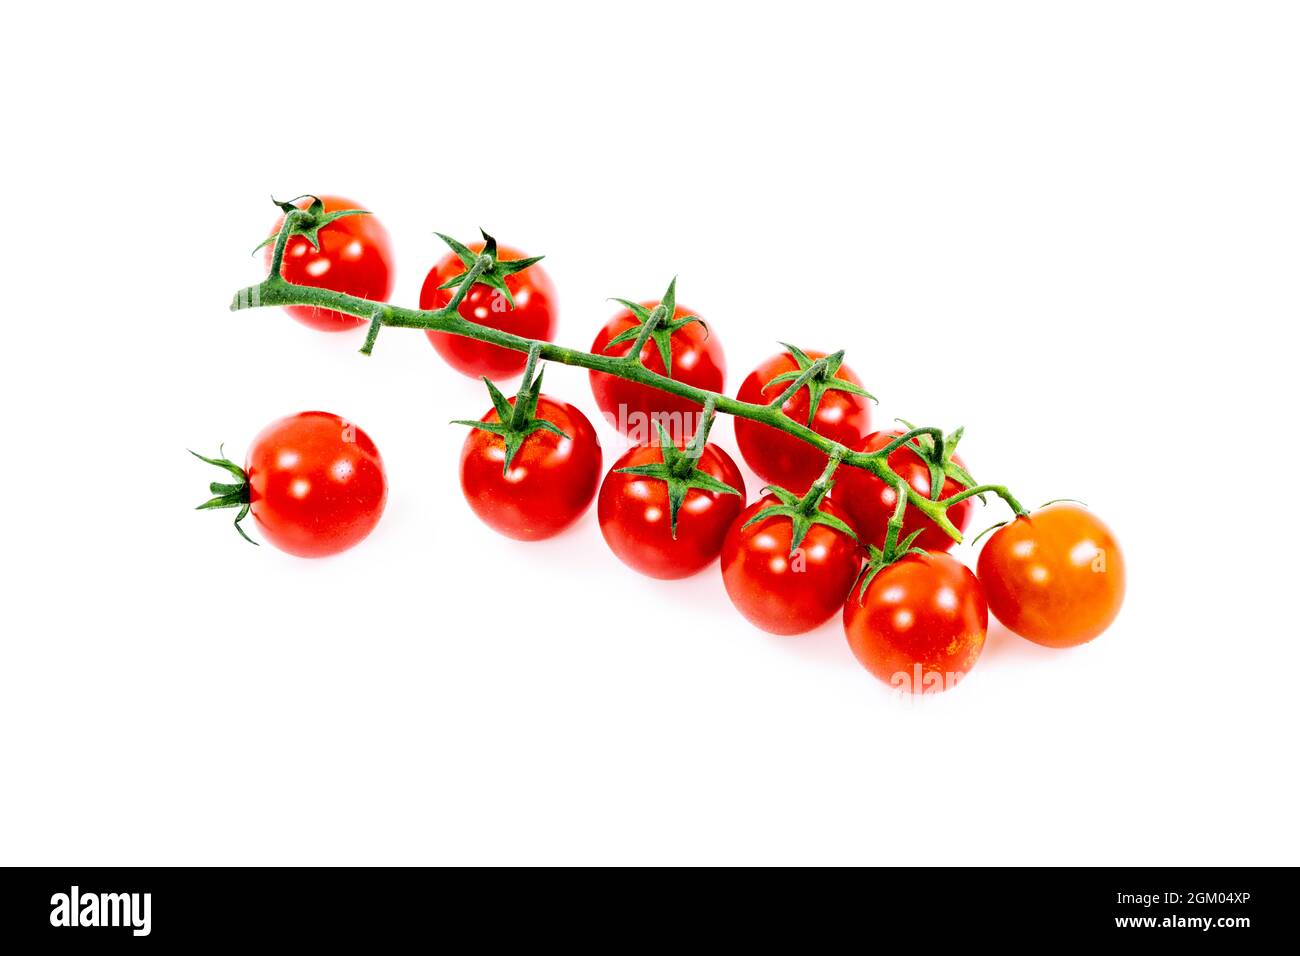 Cluster of solitary cherry tomatoes with one loose tomato on white surface Stock Photo